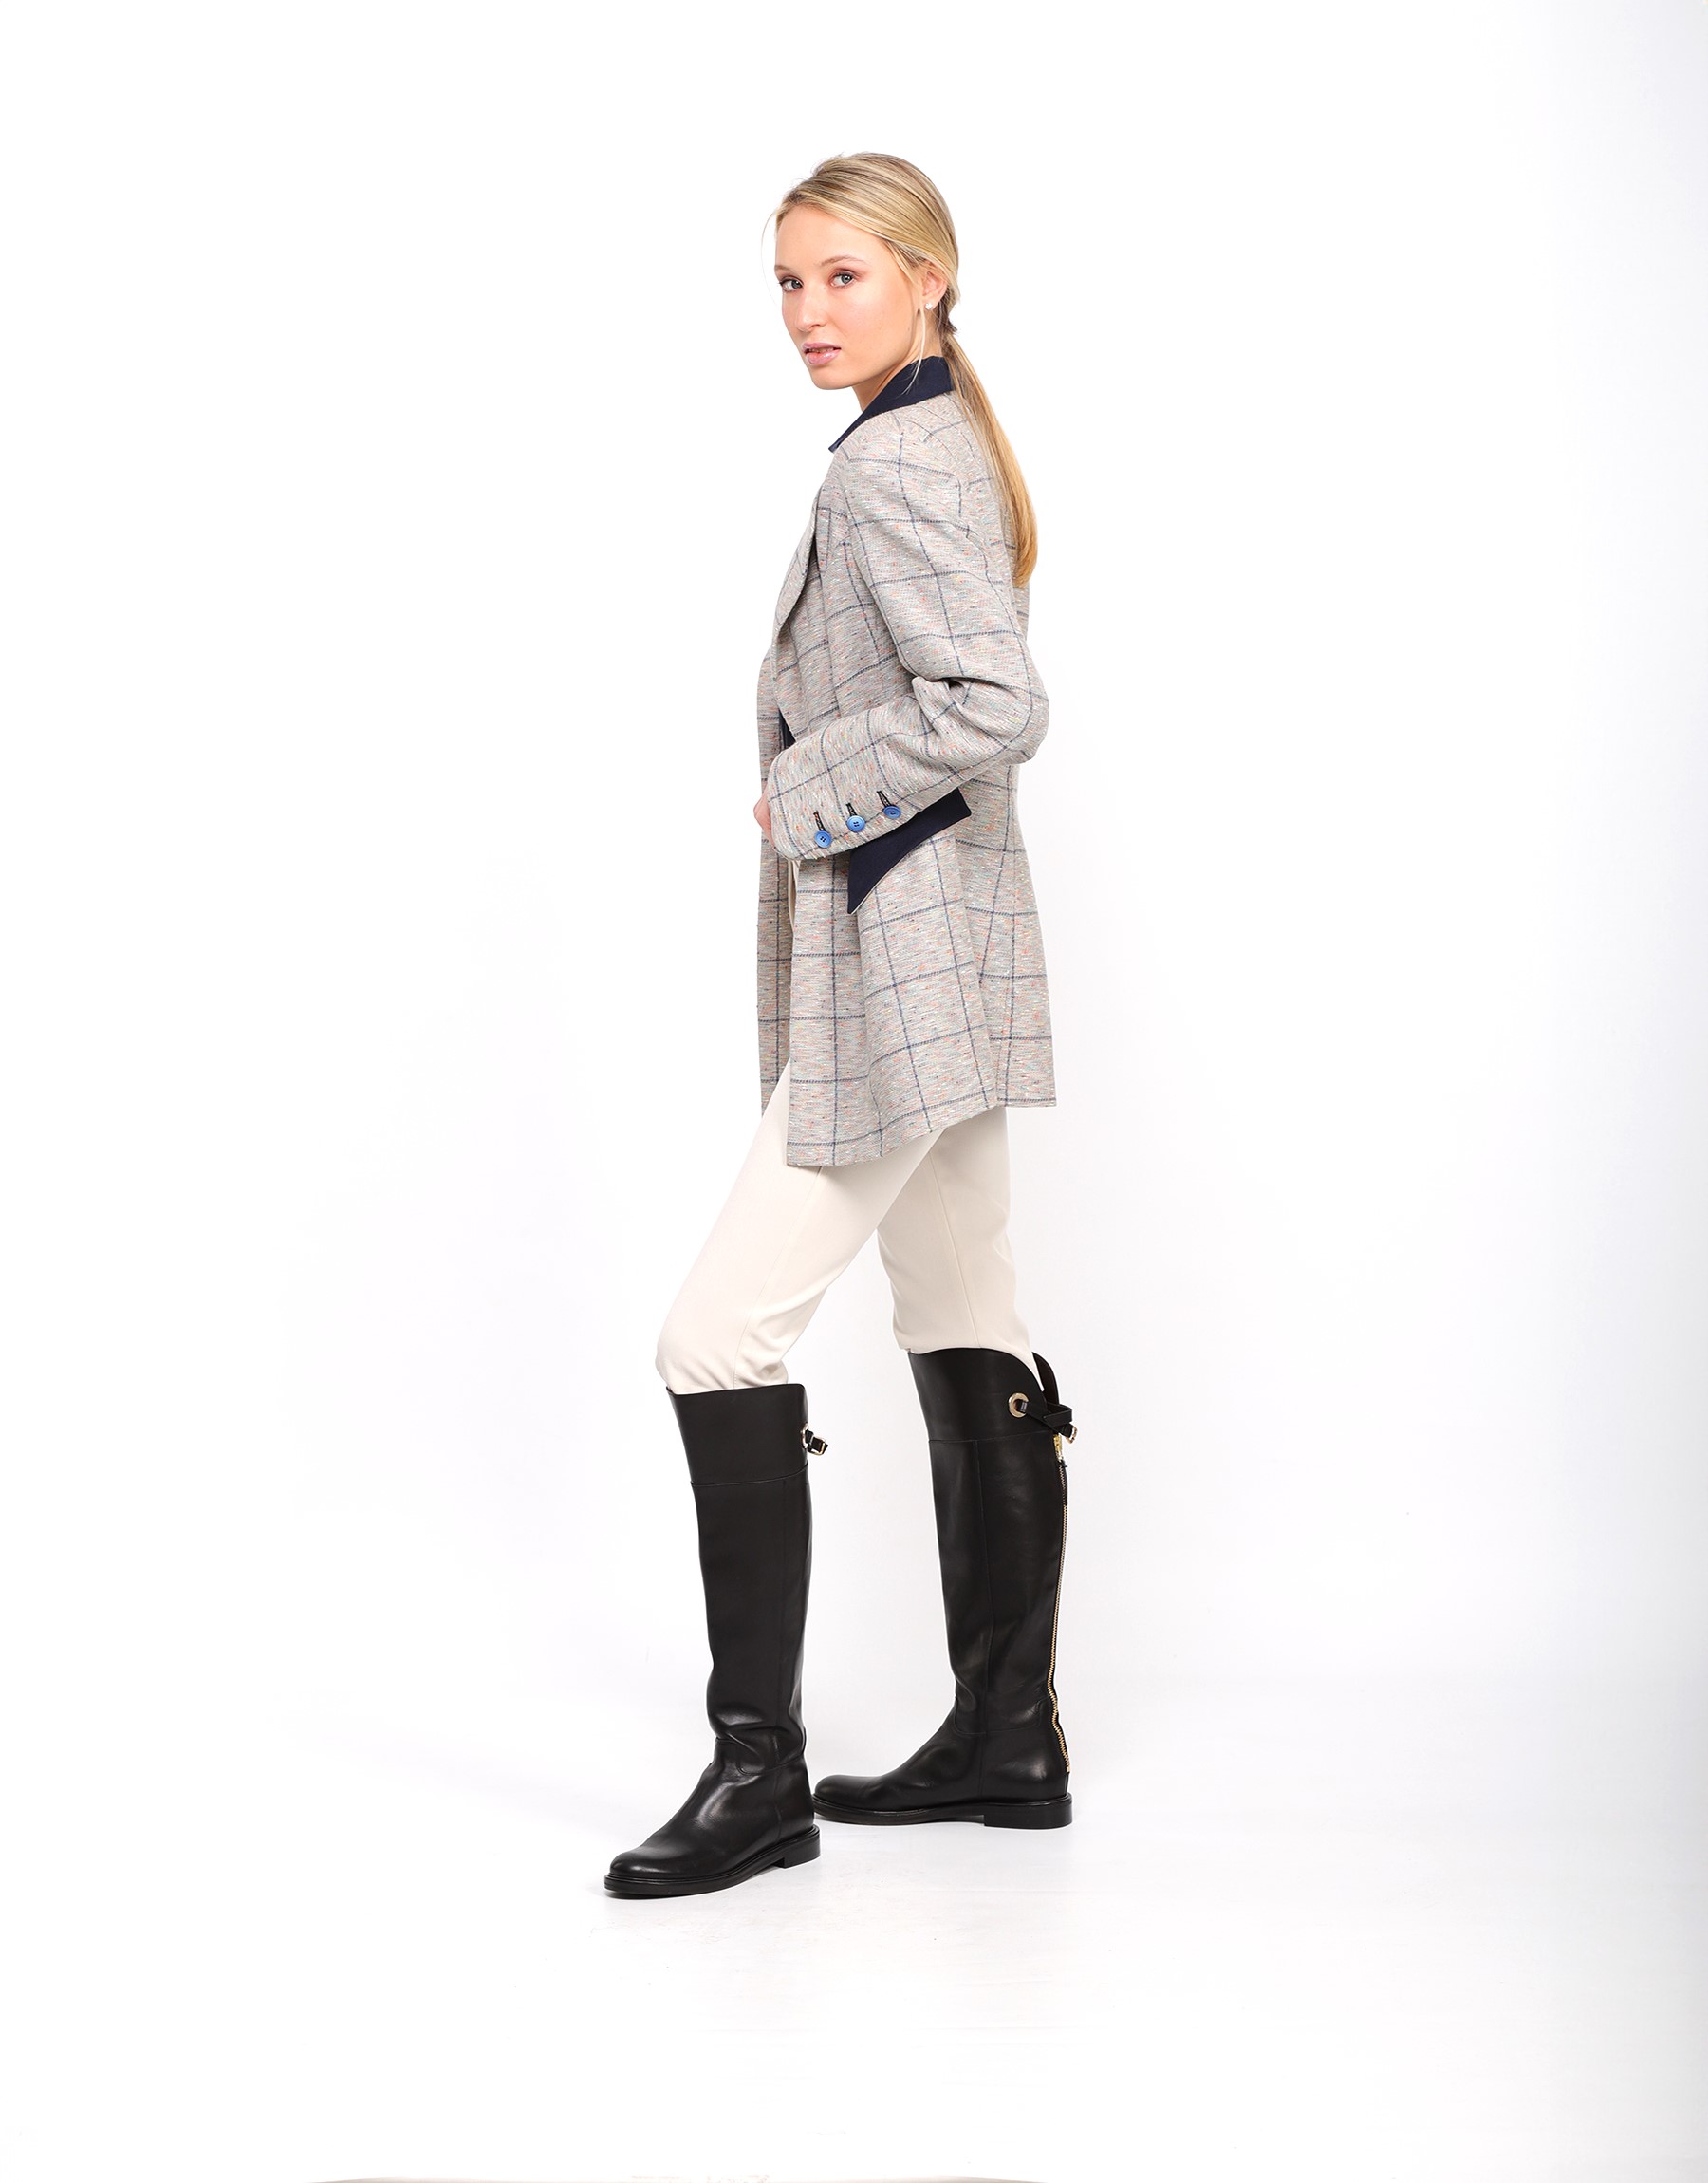 Long fitted jacket in gray blue checkered fabric in pastel tones